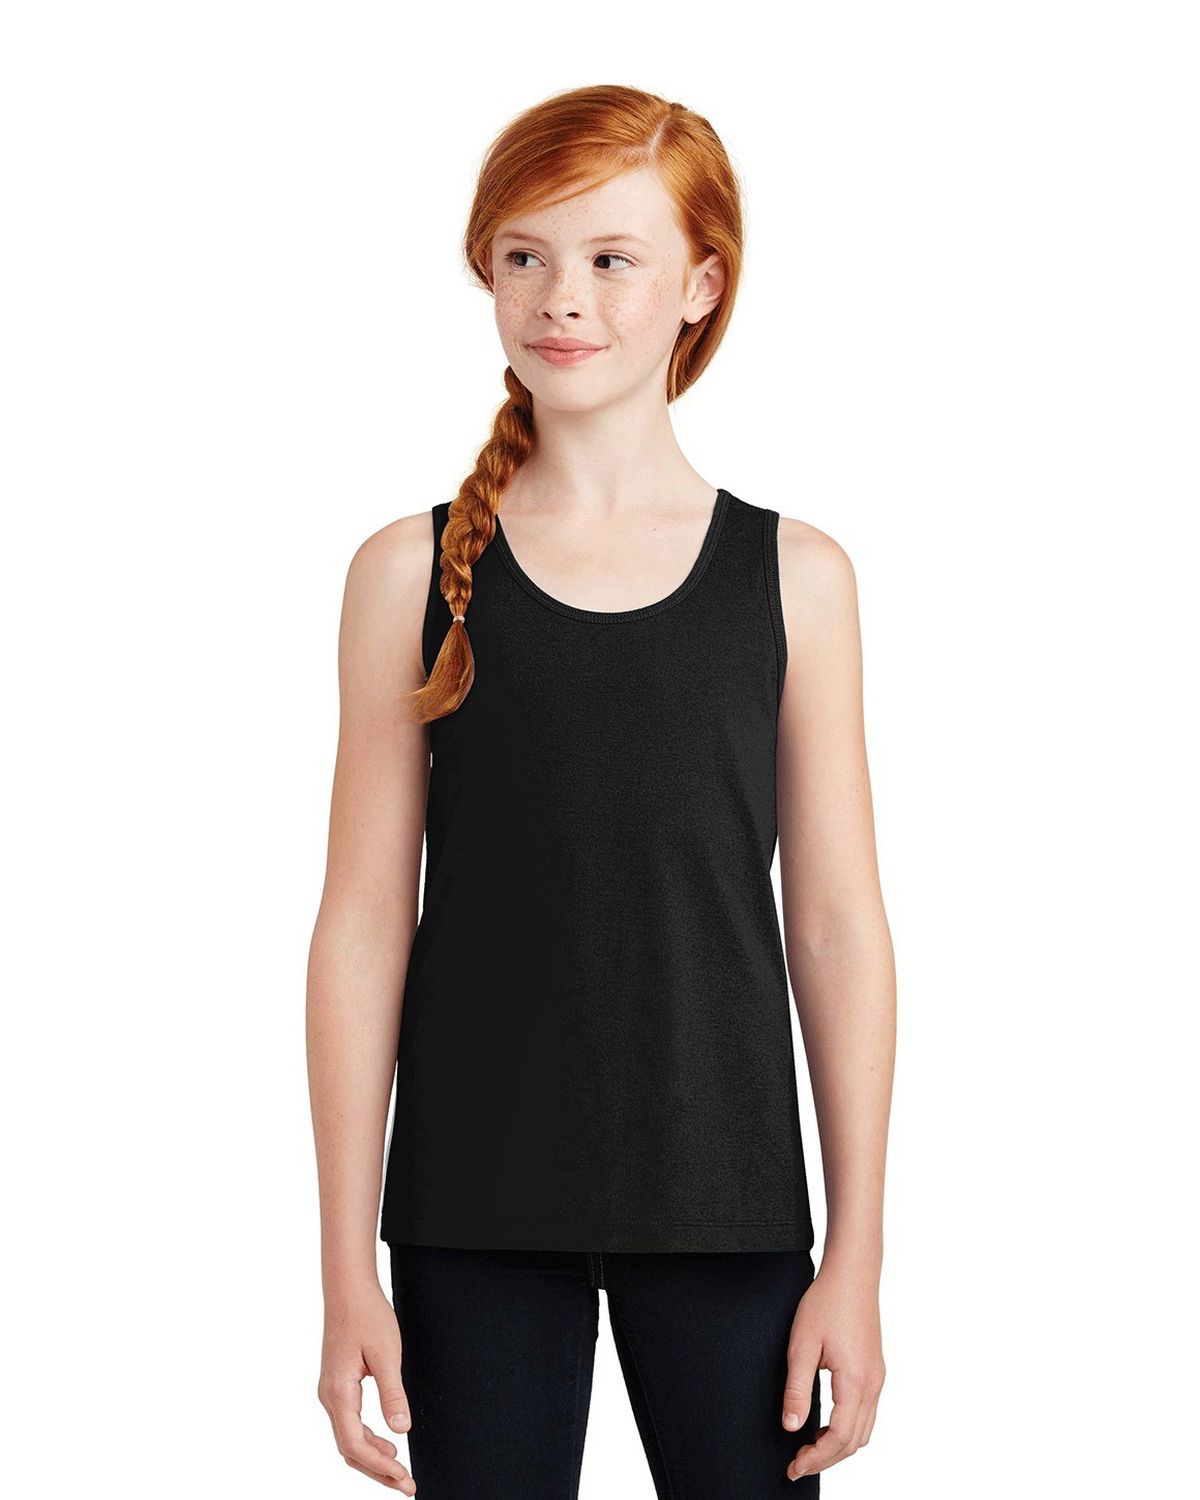 District DT5301YG Girls The Concert Tank at ApparelnBags.com